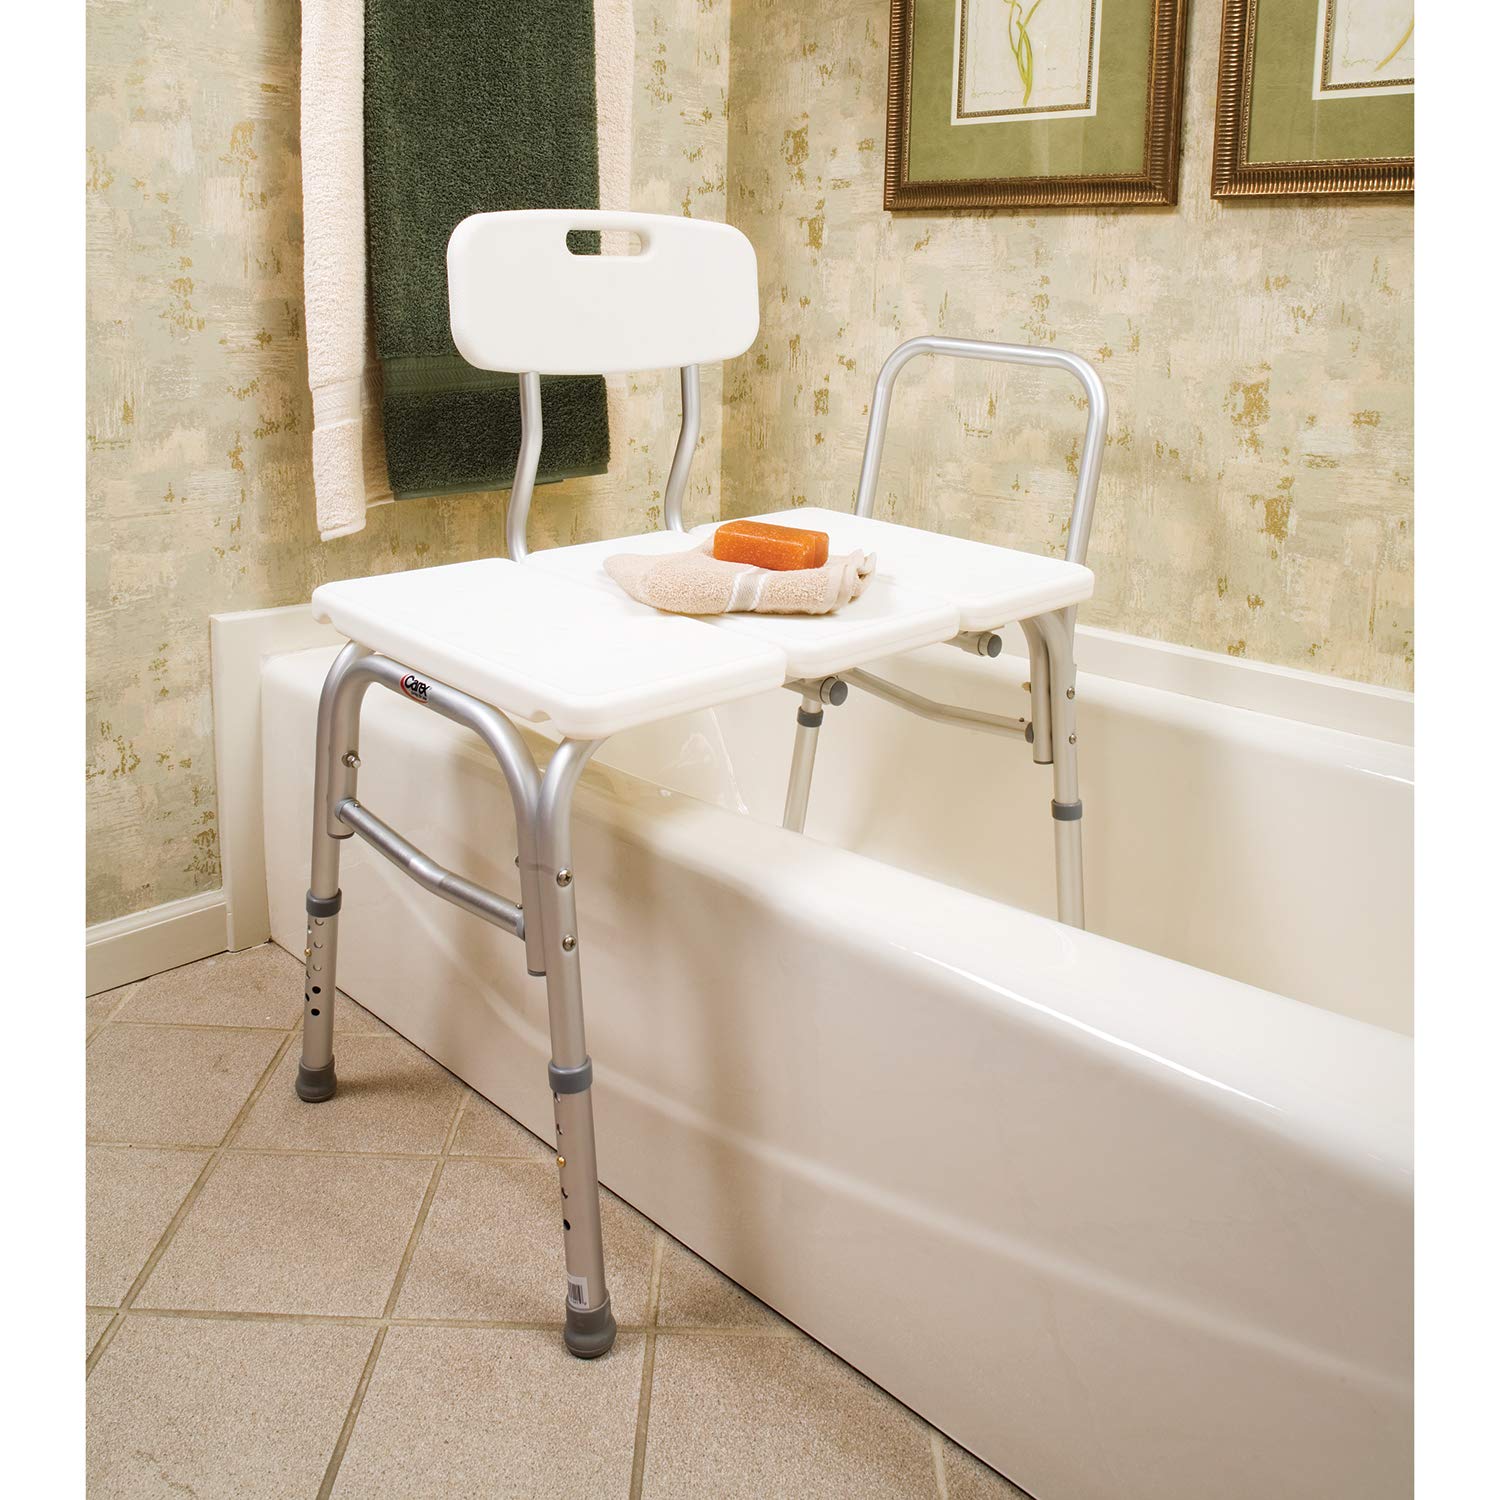 Carex Shower and Bath Transfer Bench with Height Adjustable Legs, 300 lb Weight Capacity - image 2 of 9